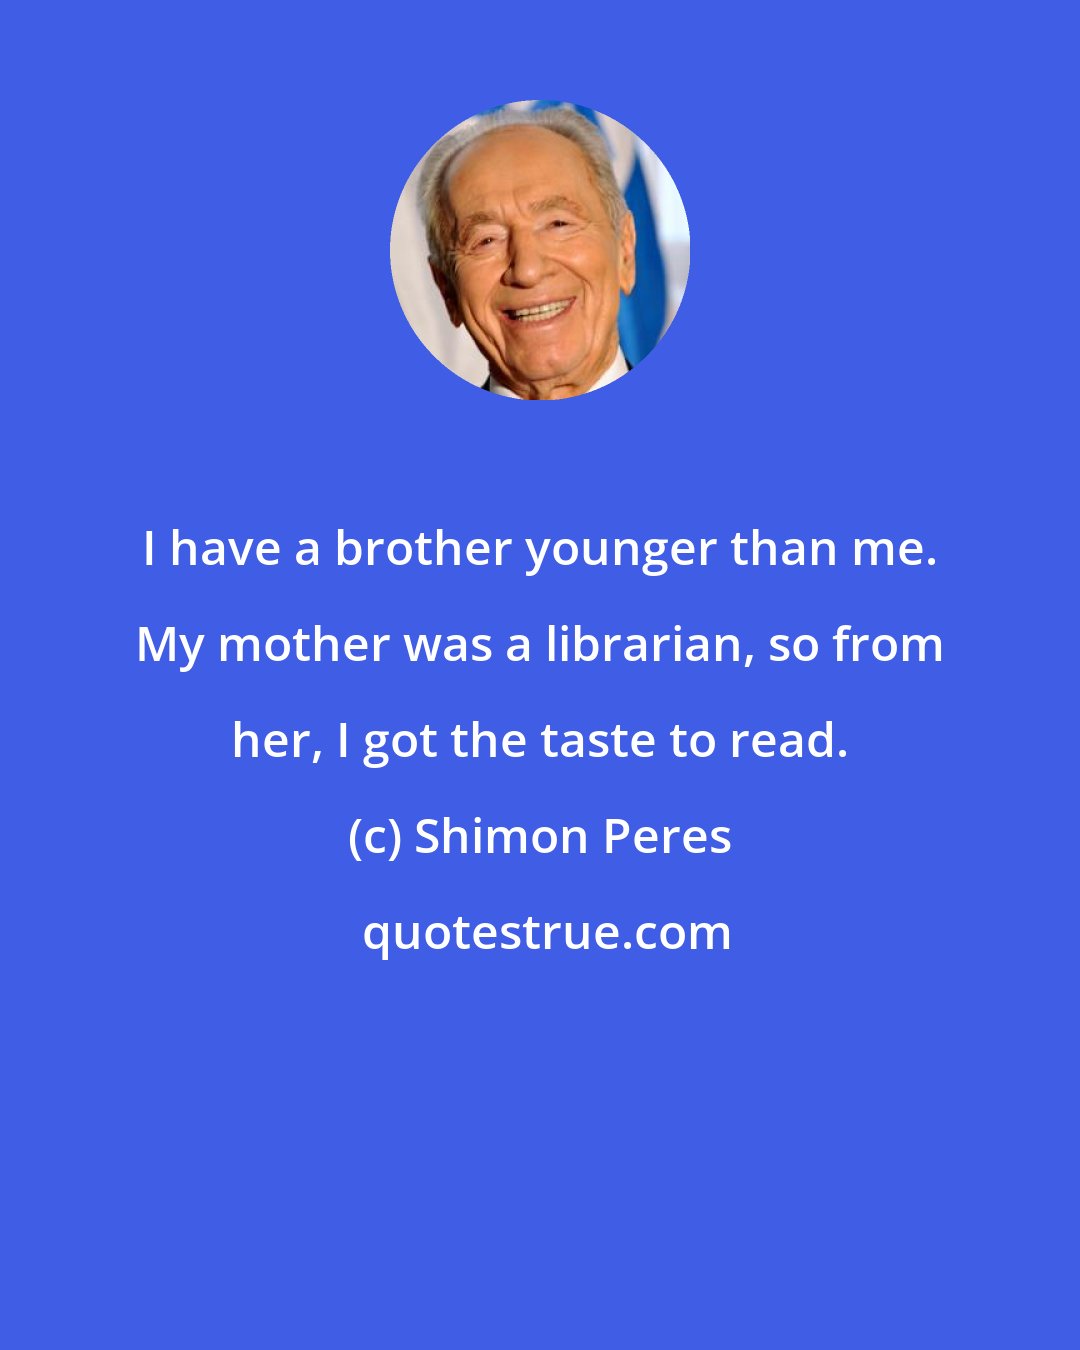 Shimon Peres: I have a brother younger than me. My mother was a librarian, so from her, I got the taste to read.